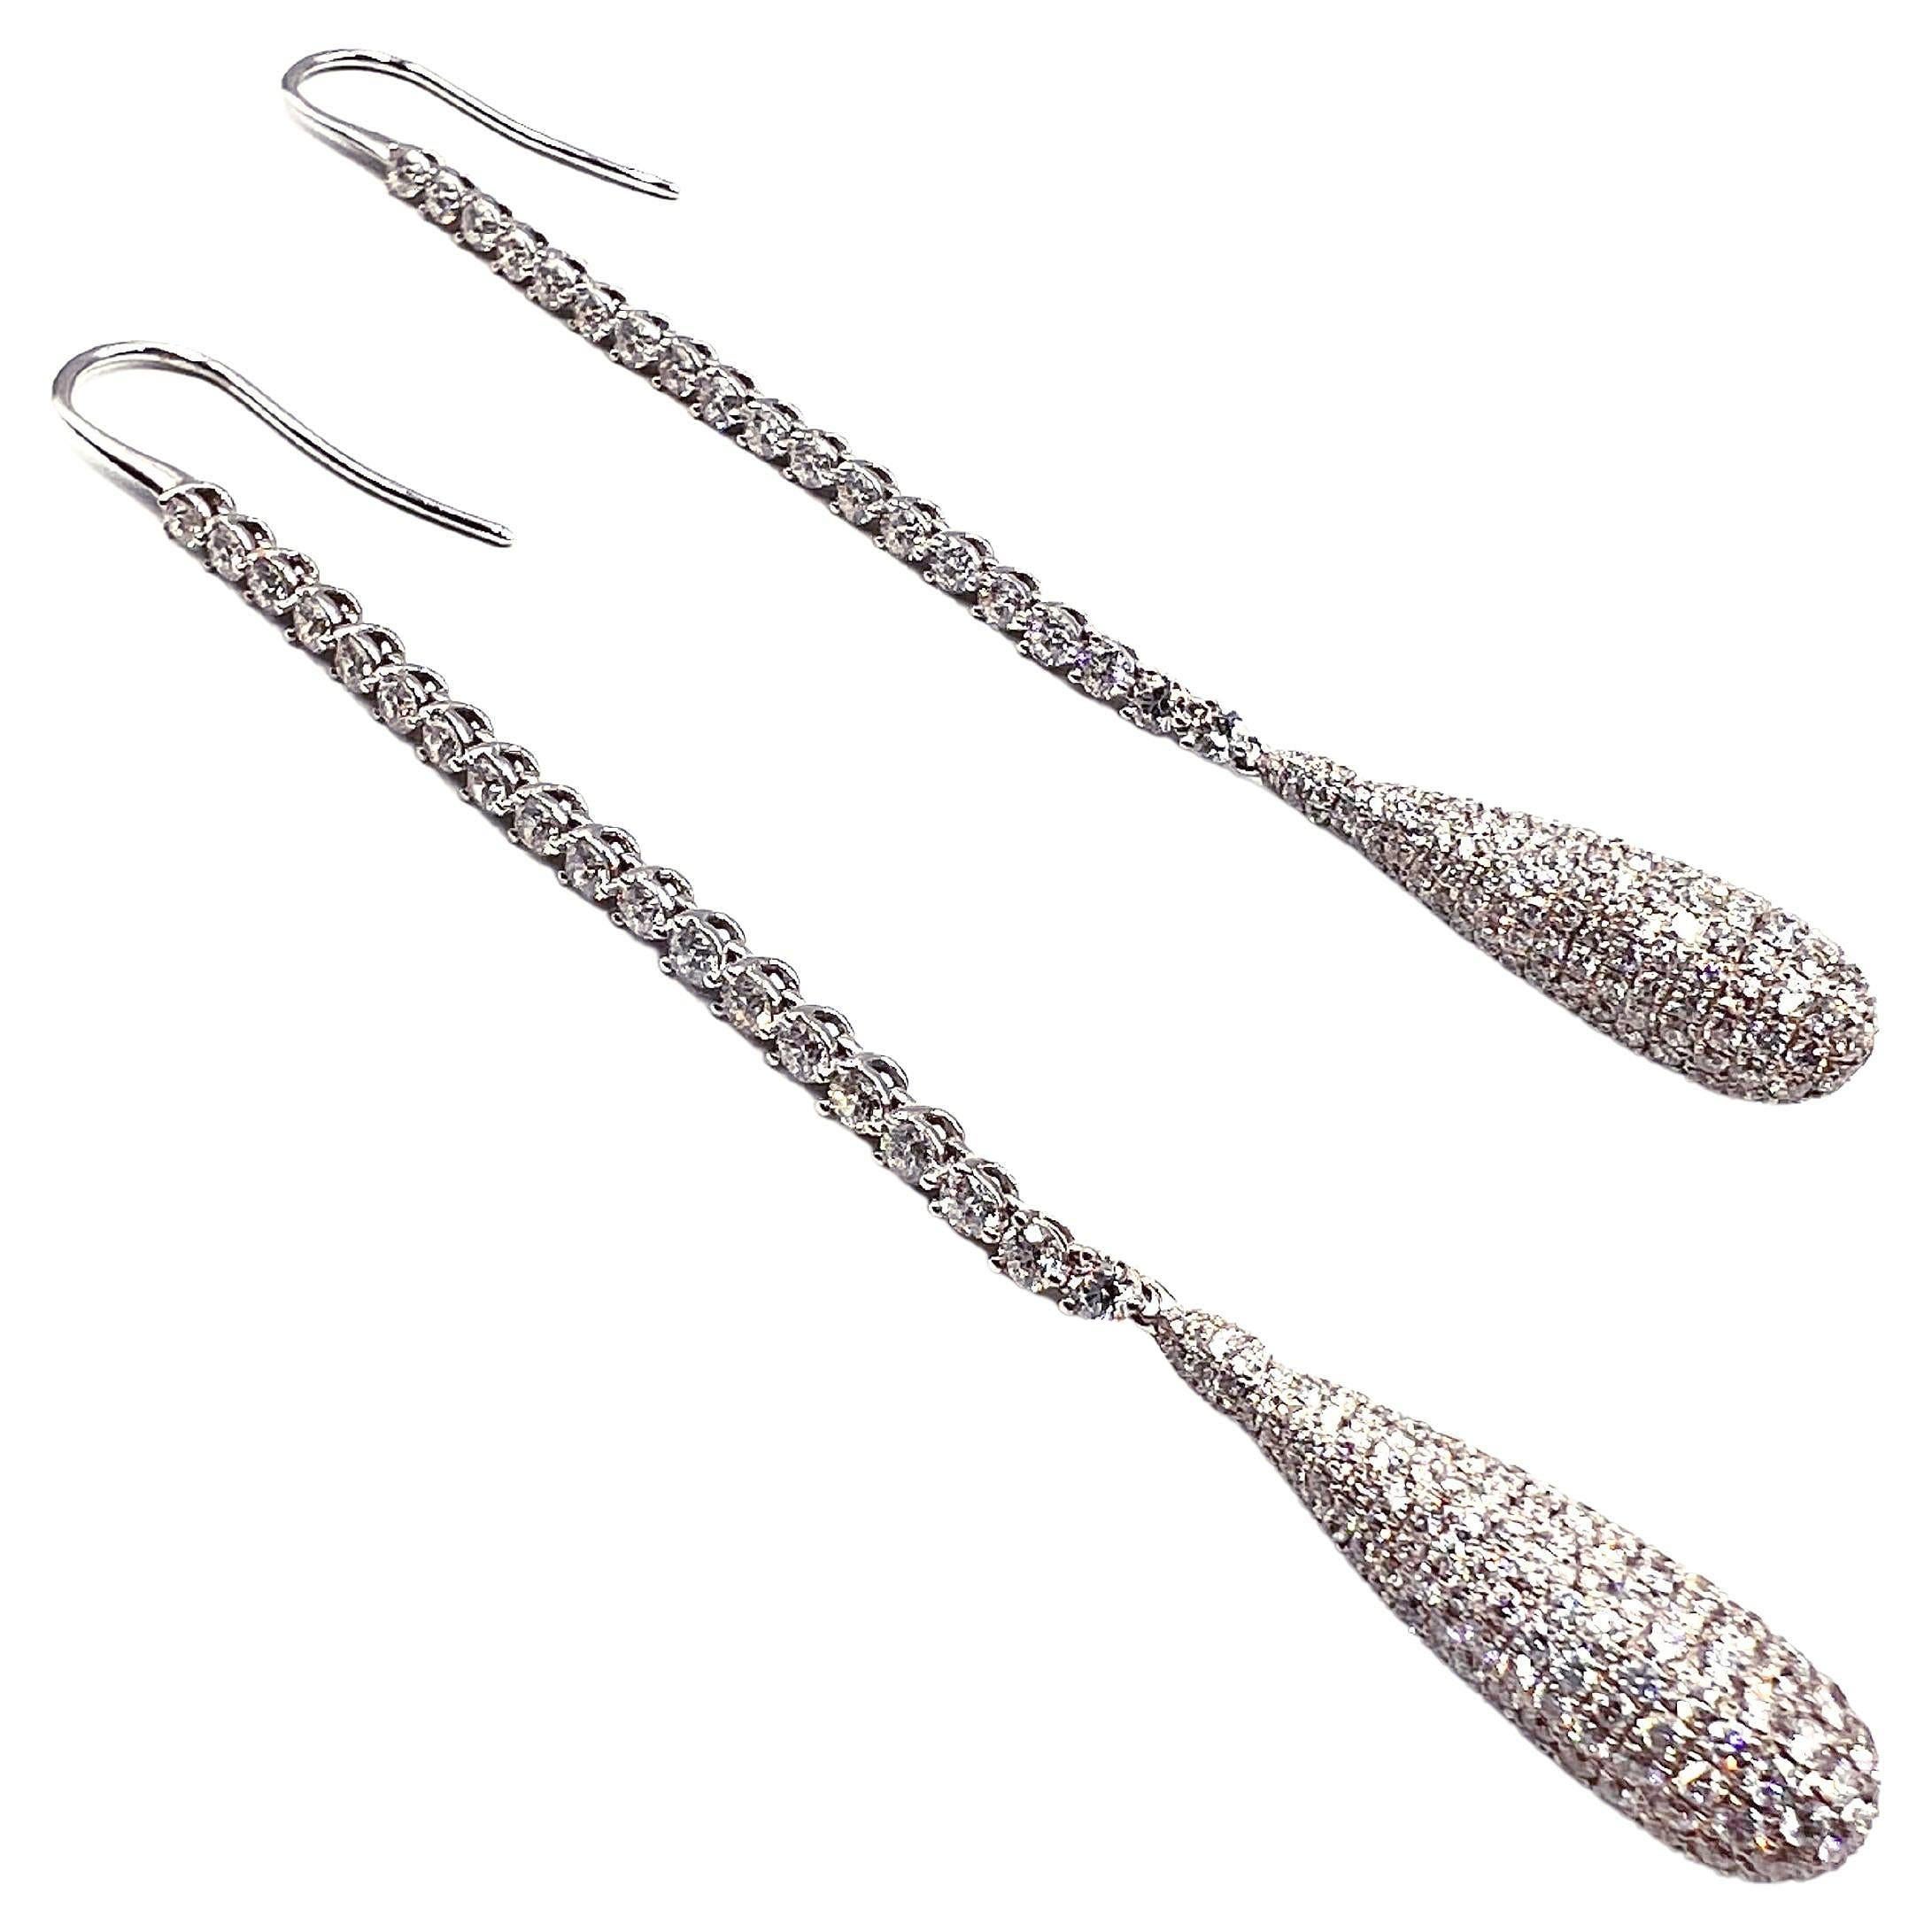 Long teardrop earrings designed by Jacob & Co. The tops are set with thirty-eight round brilliant cut diamonds weighing 2.38 total carats and the teardrop bottoms are pave-set with five hundred thirty-four round brilliant-cut diamonds weighing 4.03